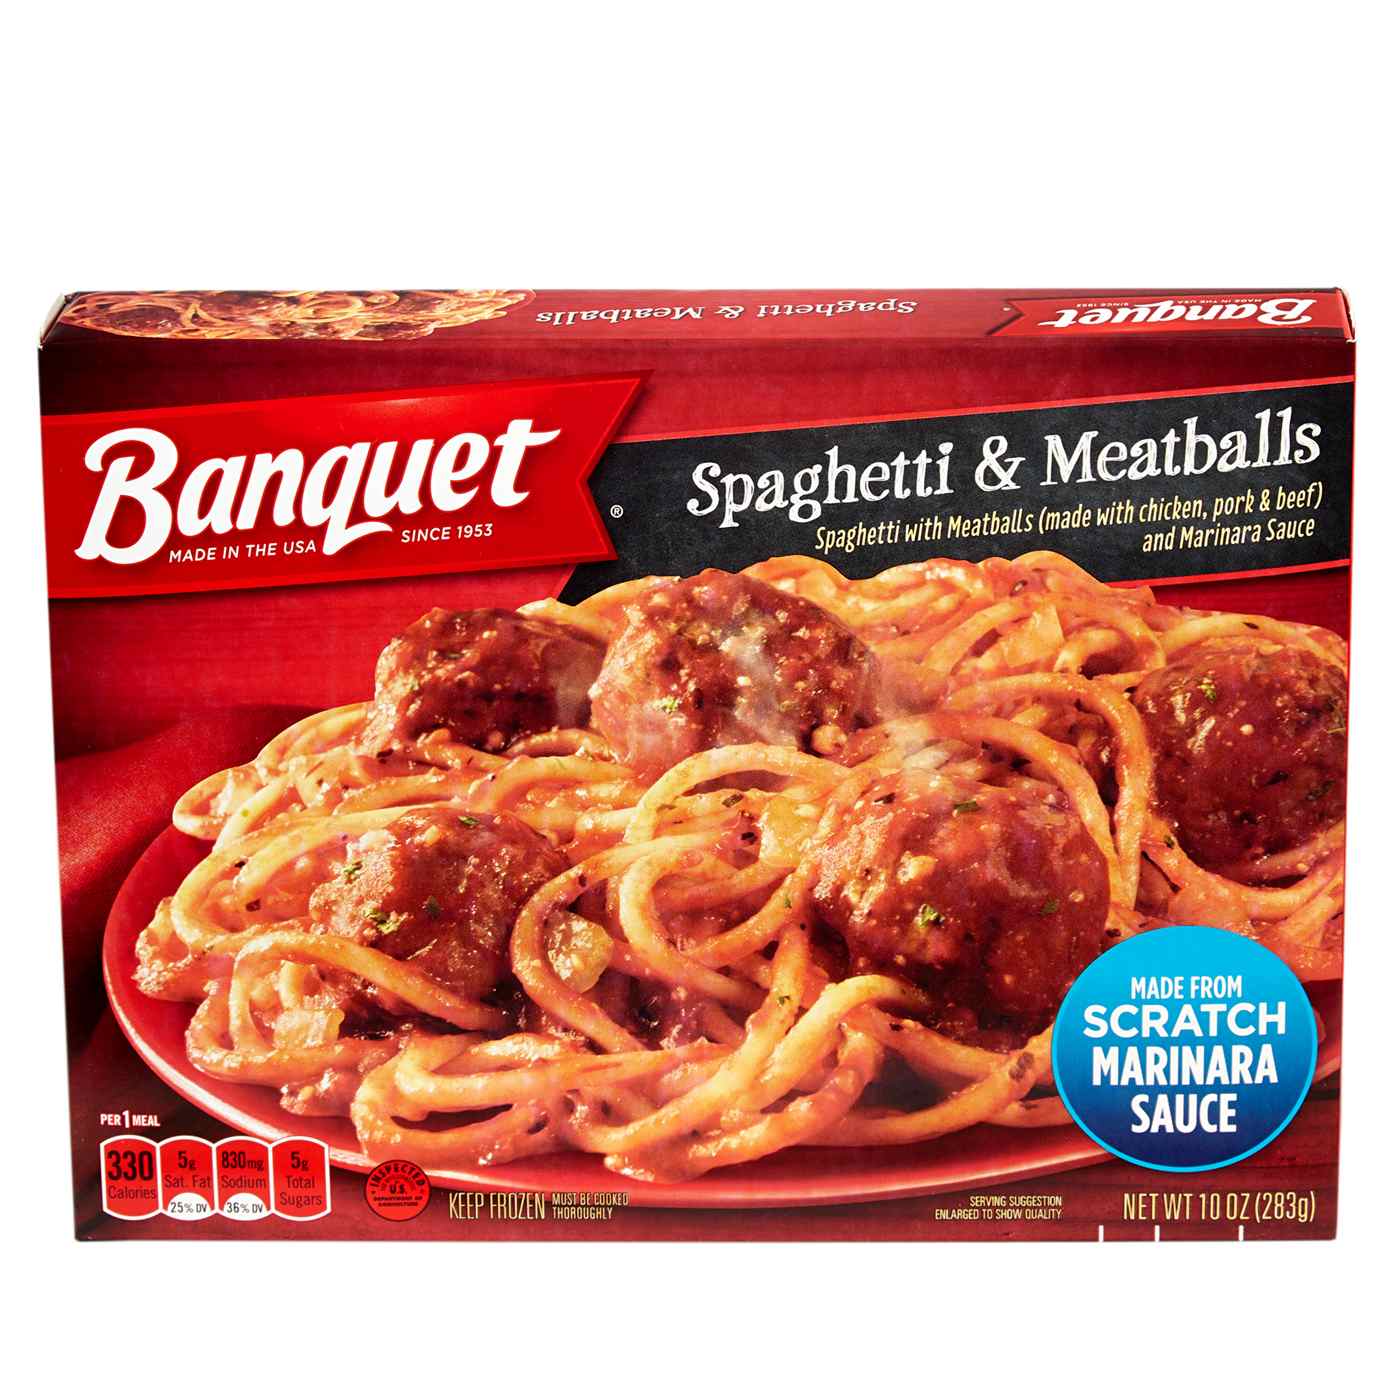 Banquet Spaghetti & Meatballs Frozen Meal; image 1 of 5